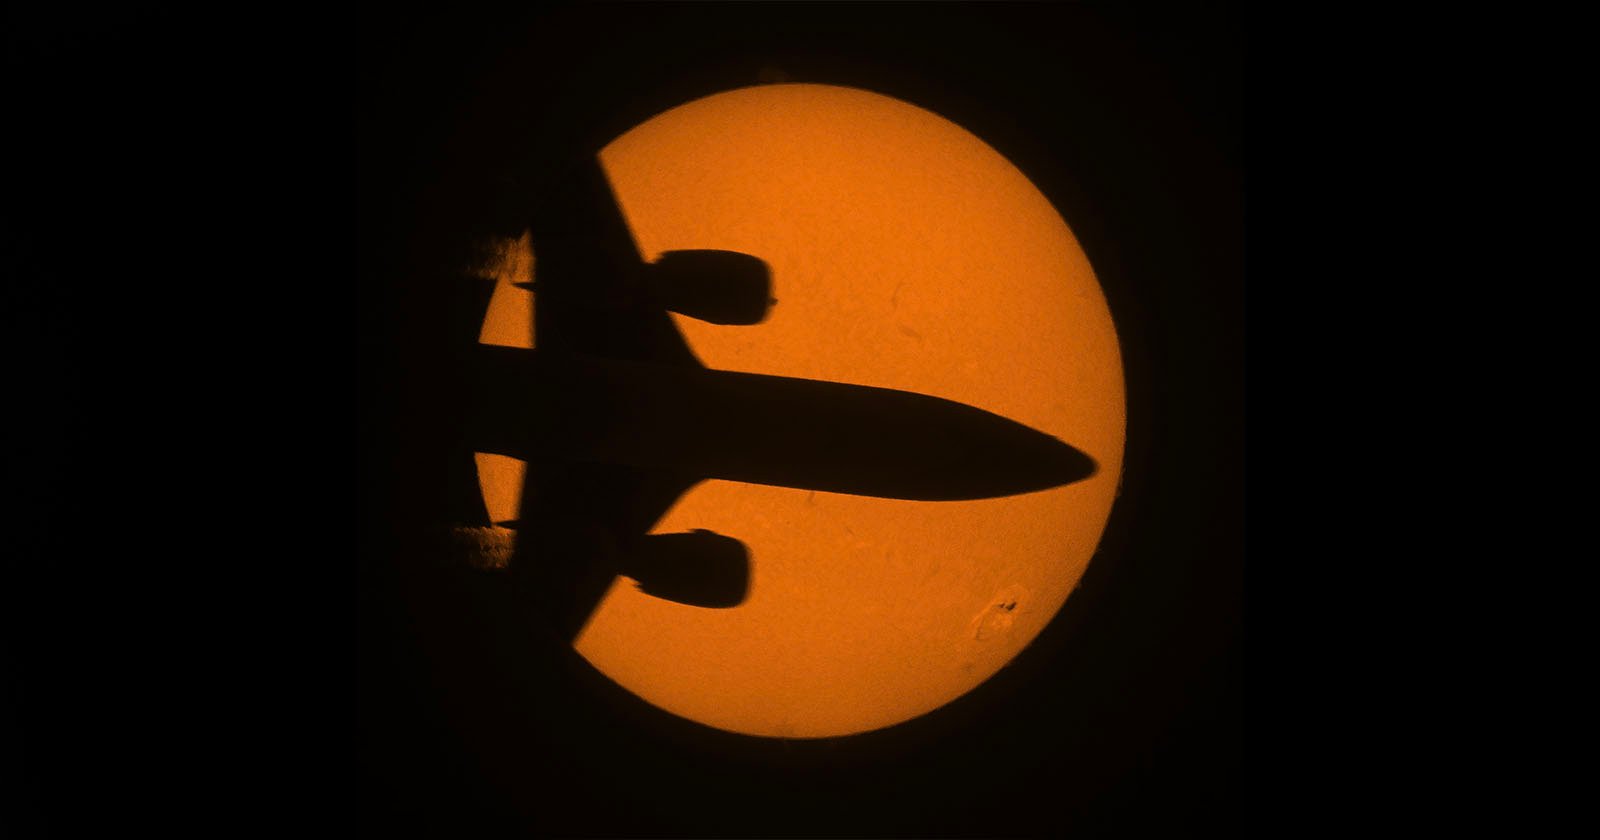 Incredible Shot of Airplane Crossing the Sun Was Captured by an Astronaut